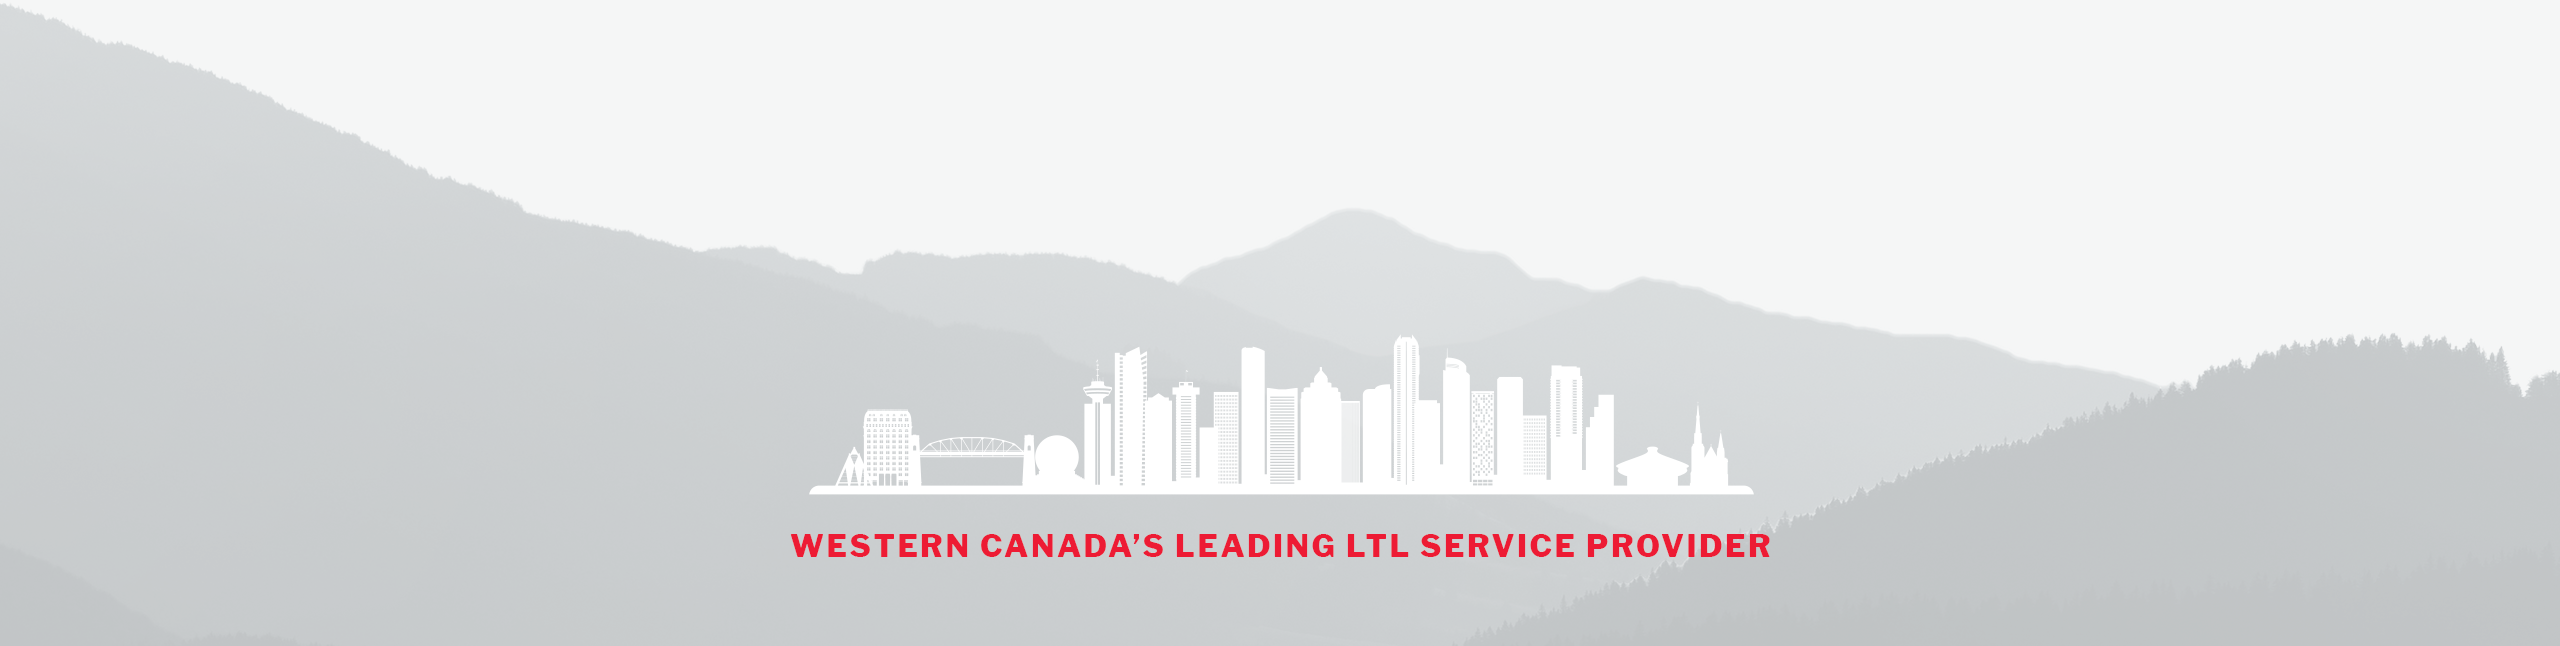 Shadows of hills behind Vancouver, BC skyline outline above 'Western Canada's Leading LTL Service Provider' text